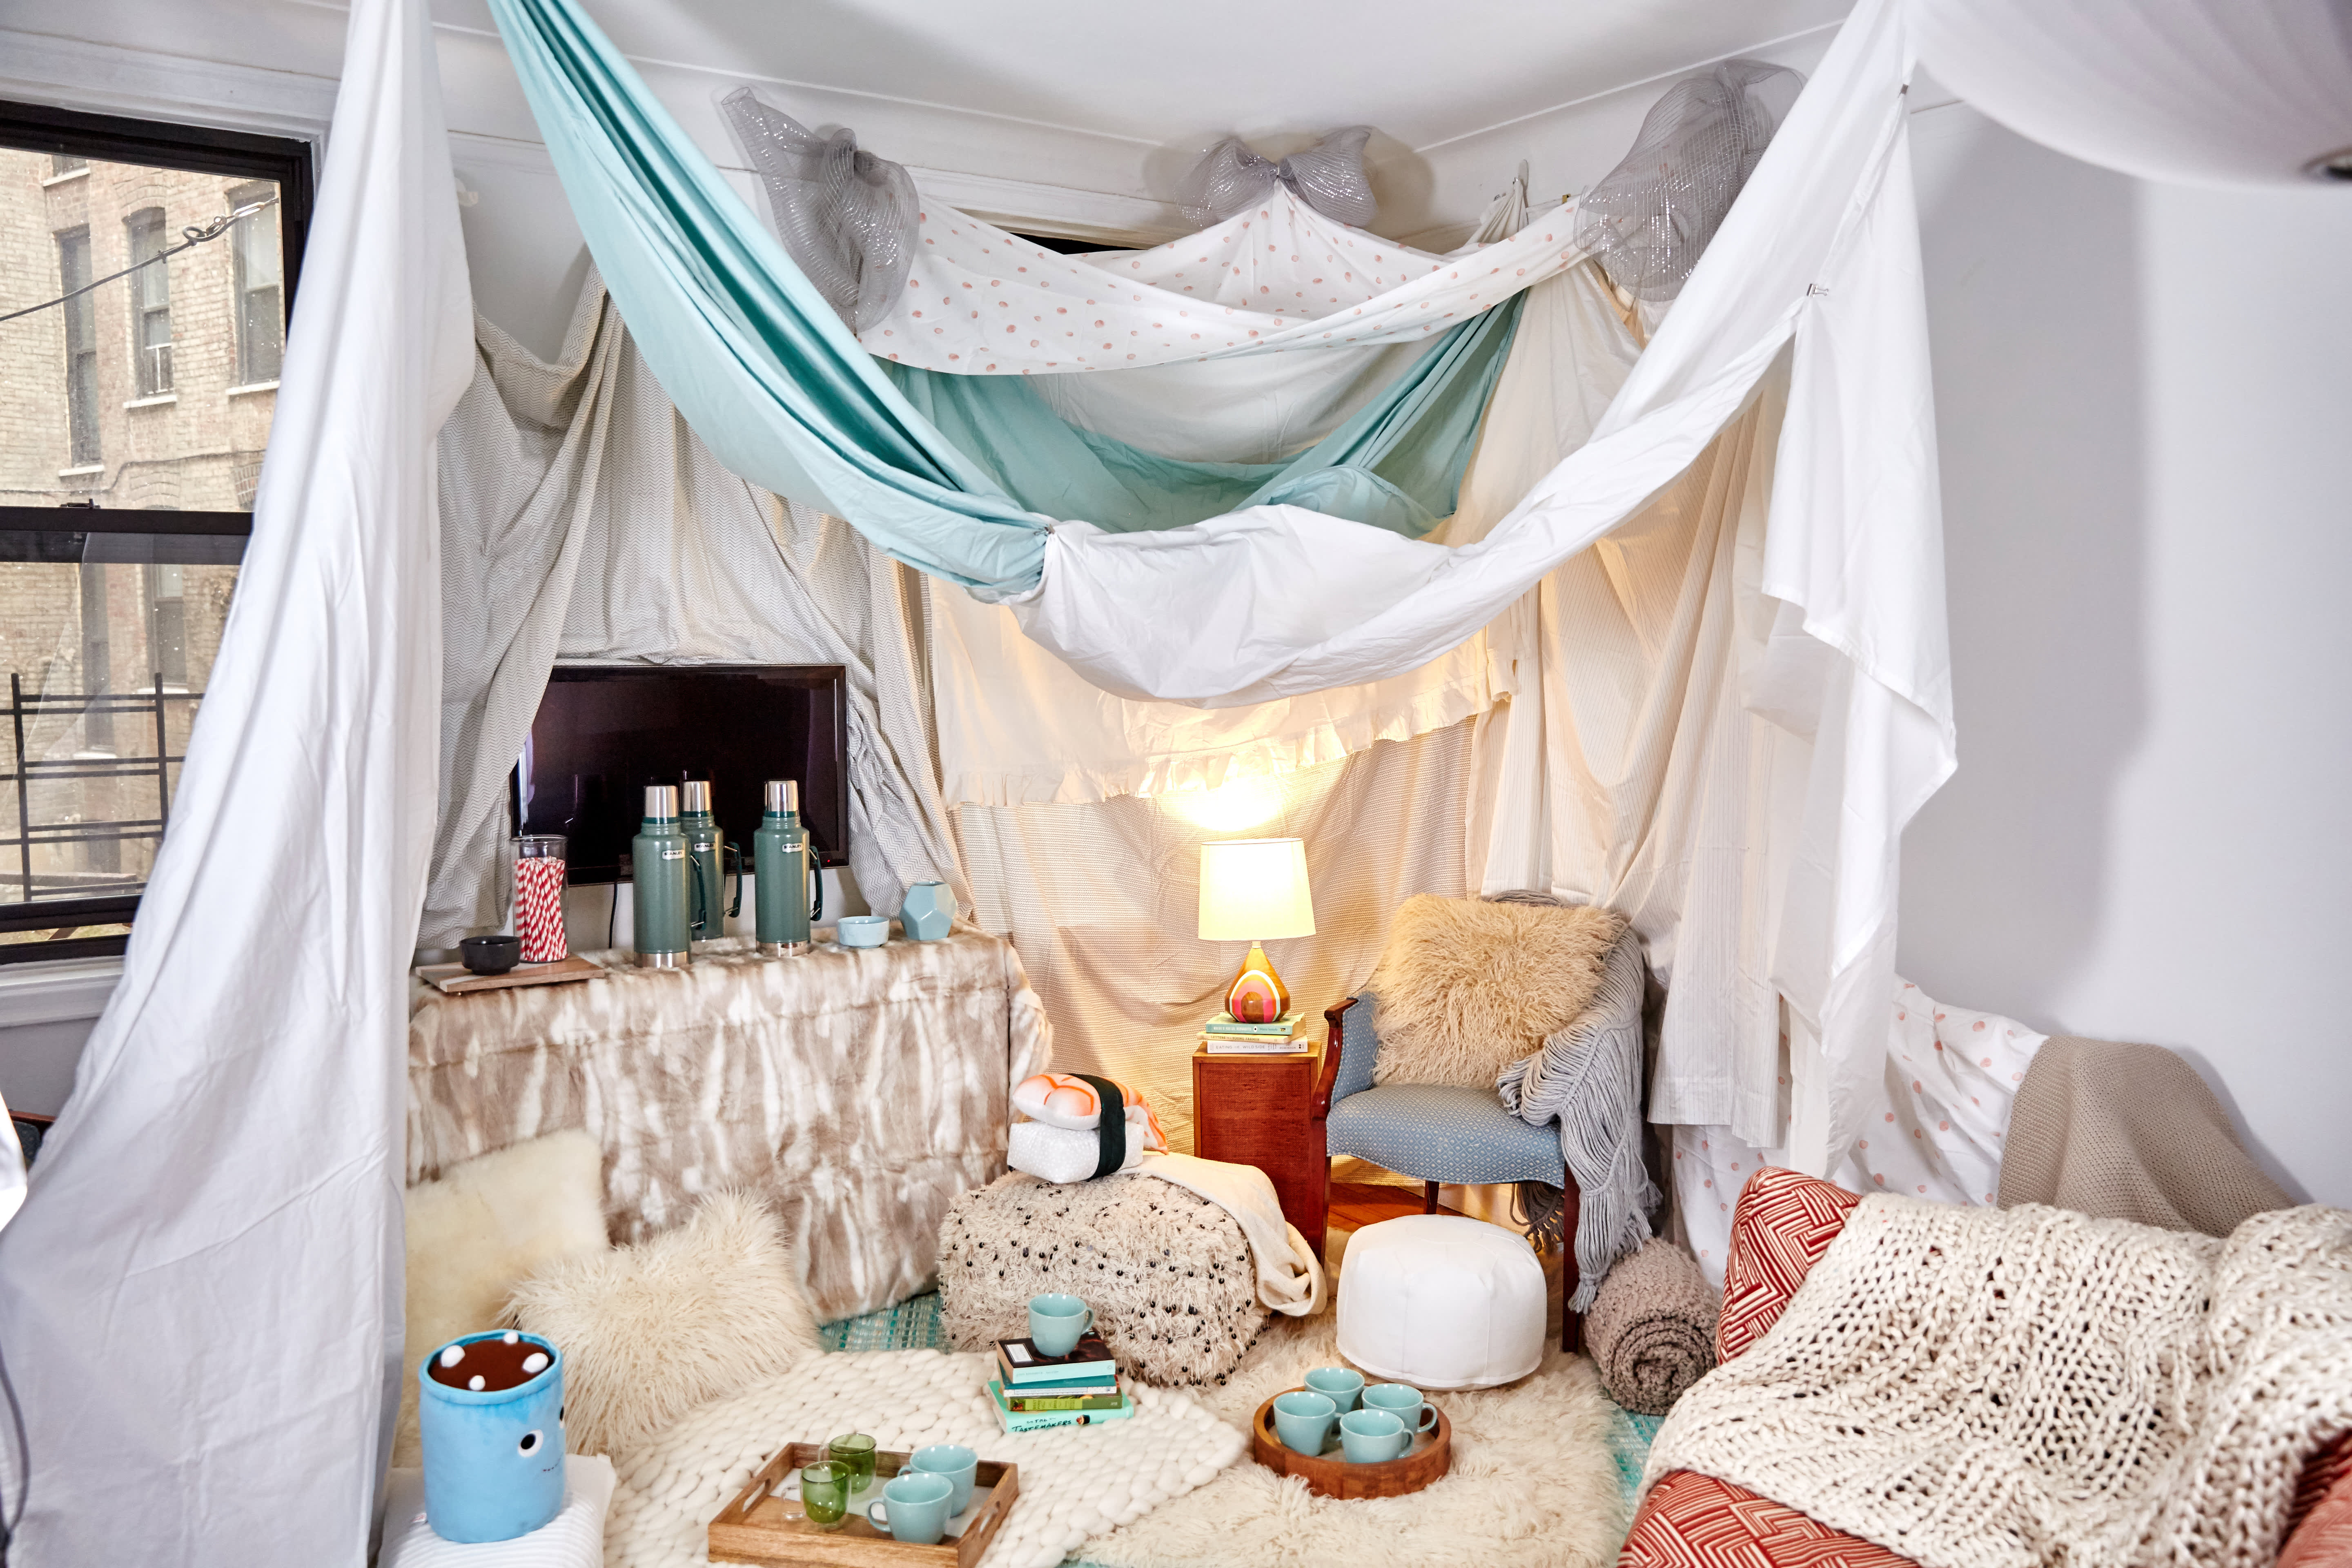 An Interior Designer's Tips for Building an Awesome Indoor Fort